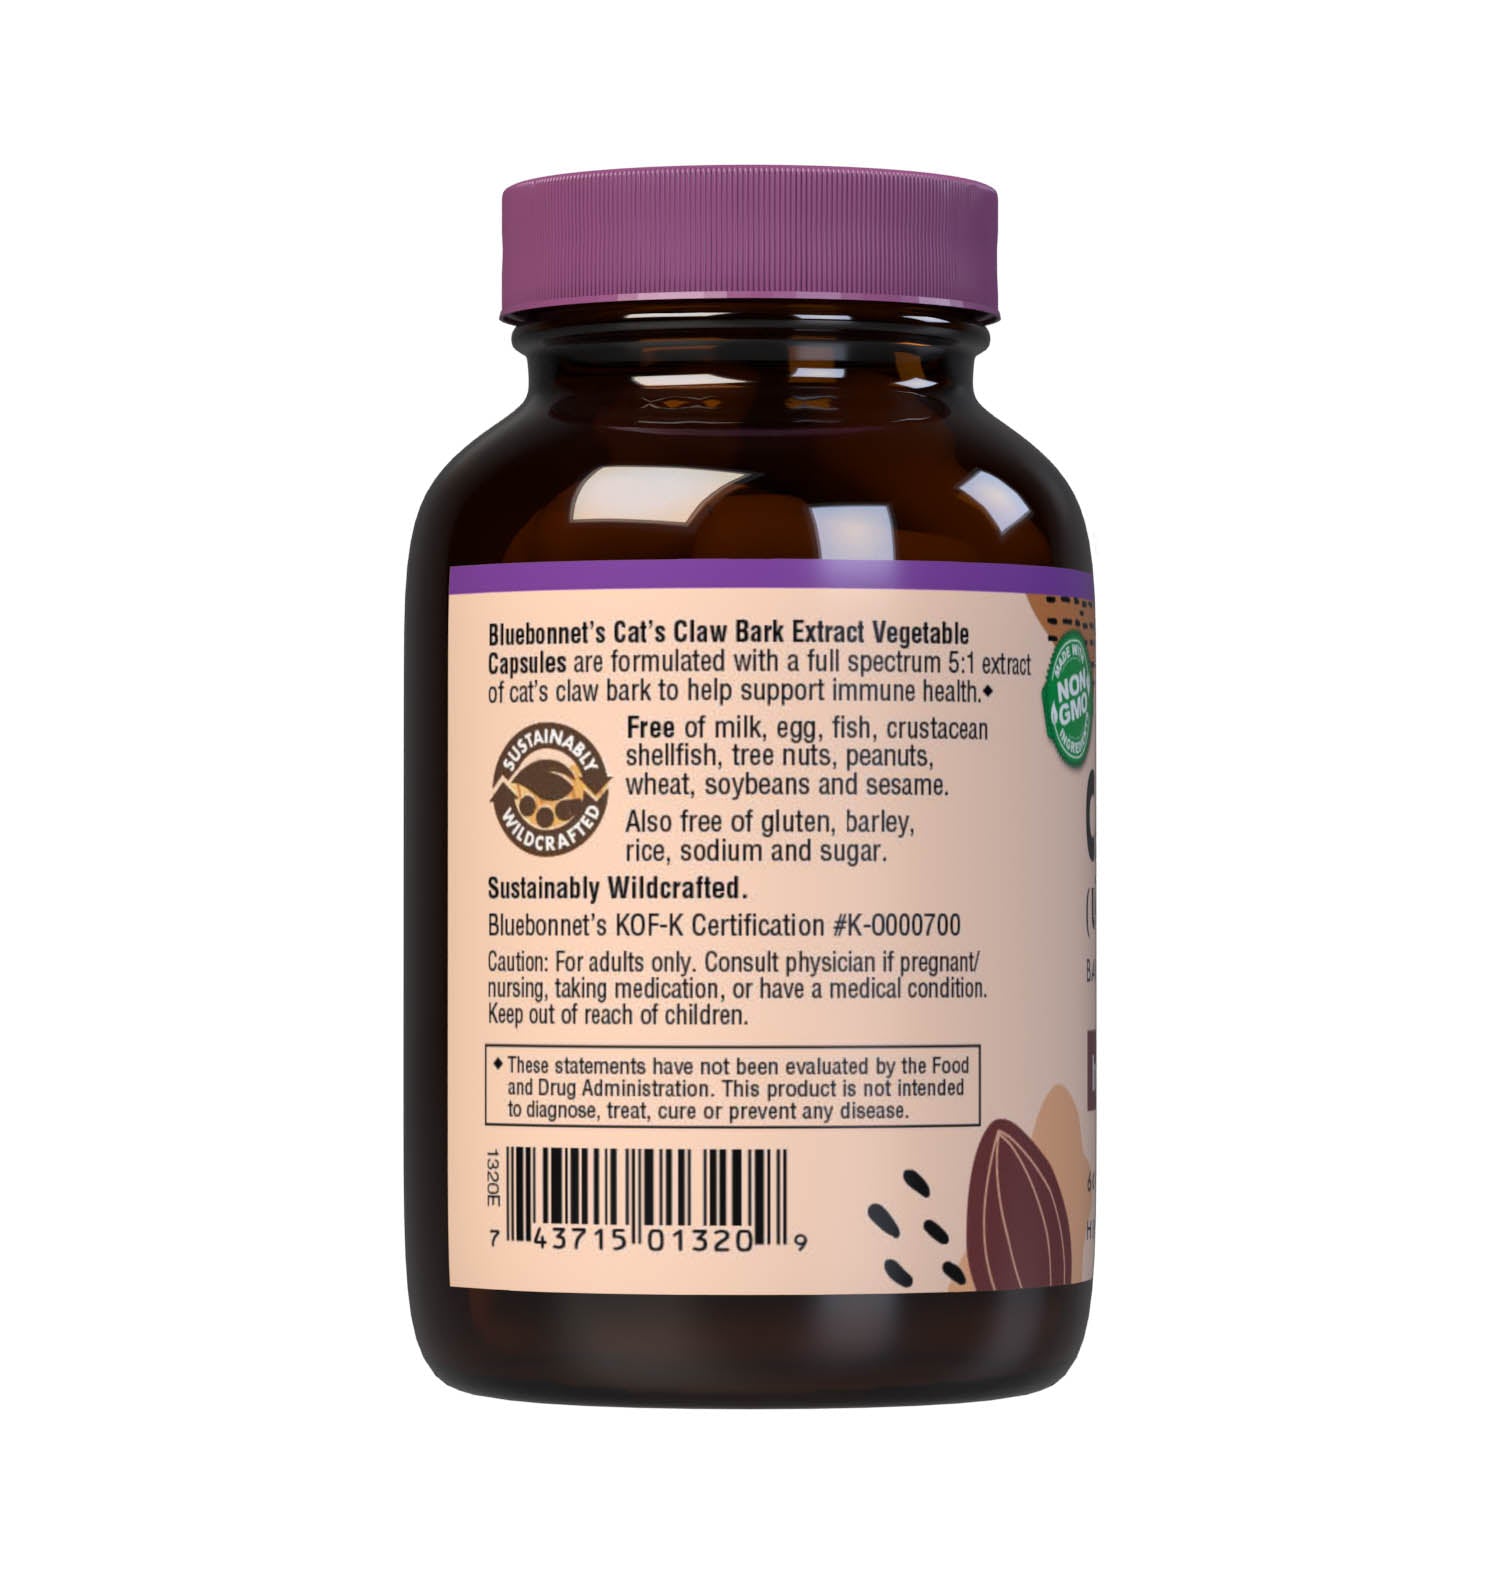 Bluebonnet’s Cat’s Claw Bark Extract 60 Vegetable Capsules contain a full spectrum extract of cat’s claw bark that is carefully produced by a clean and gentle water-based extraction method is employed to capture and preserve cat’s claw’s most valuable components. Description panel. #size_60 count